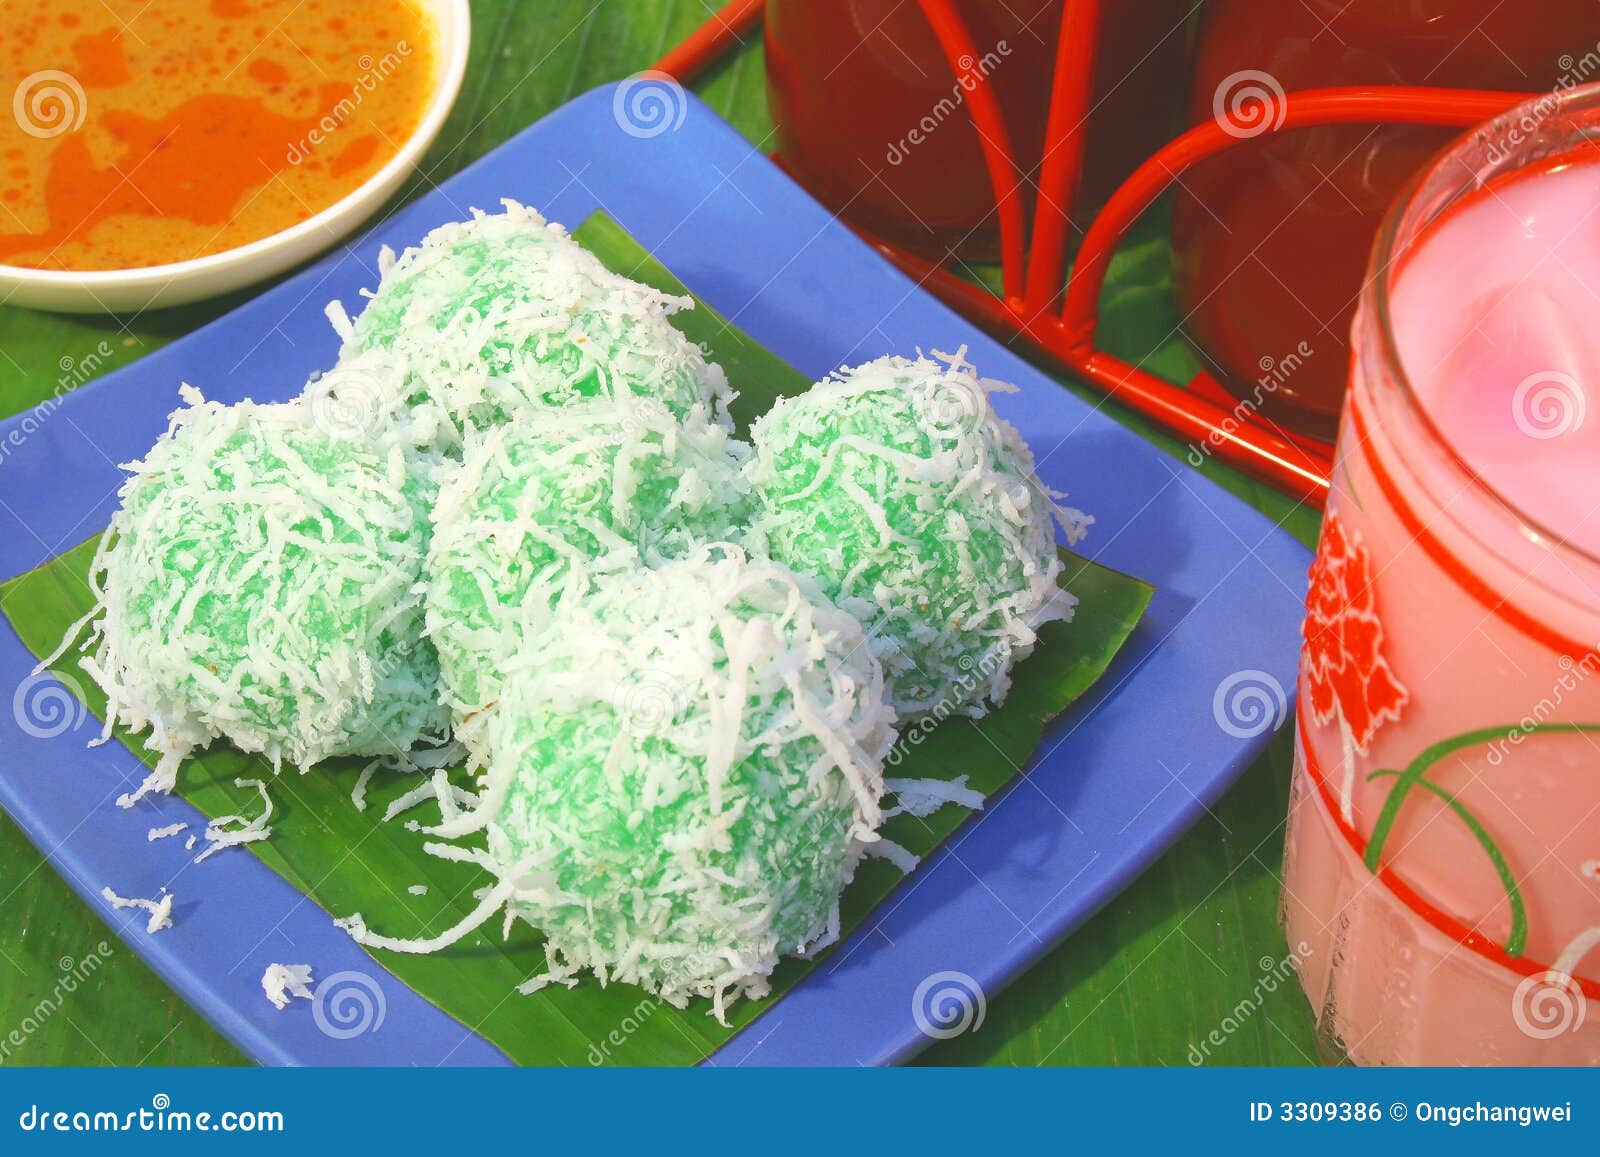 18 029 Malaysia Traditional Food Photos Free Royalty Free Stock Photos From Dreamstime